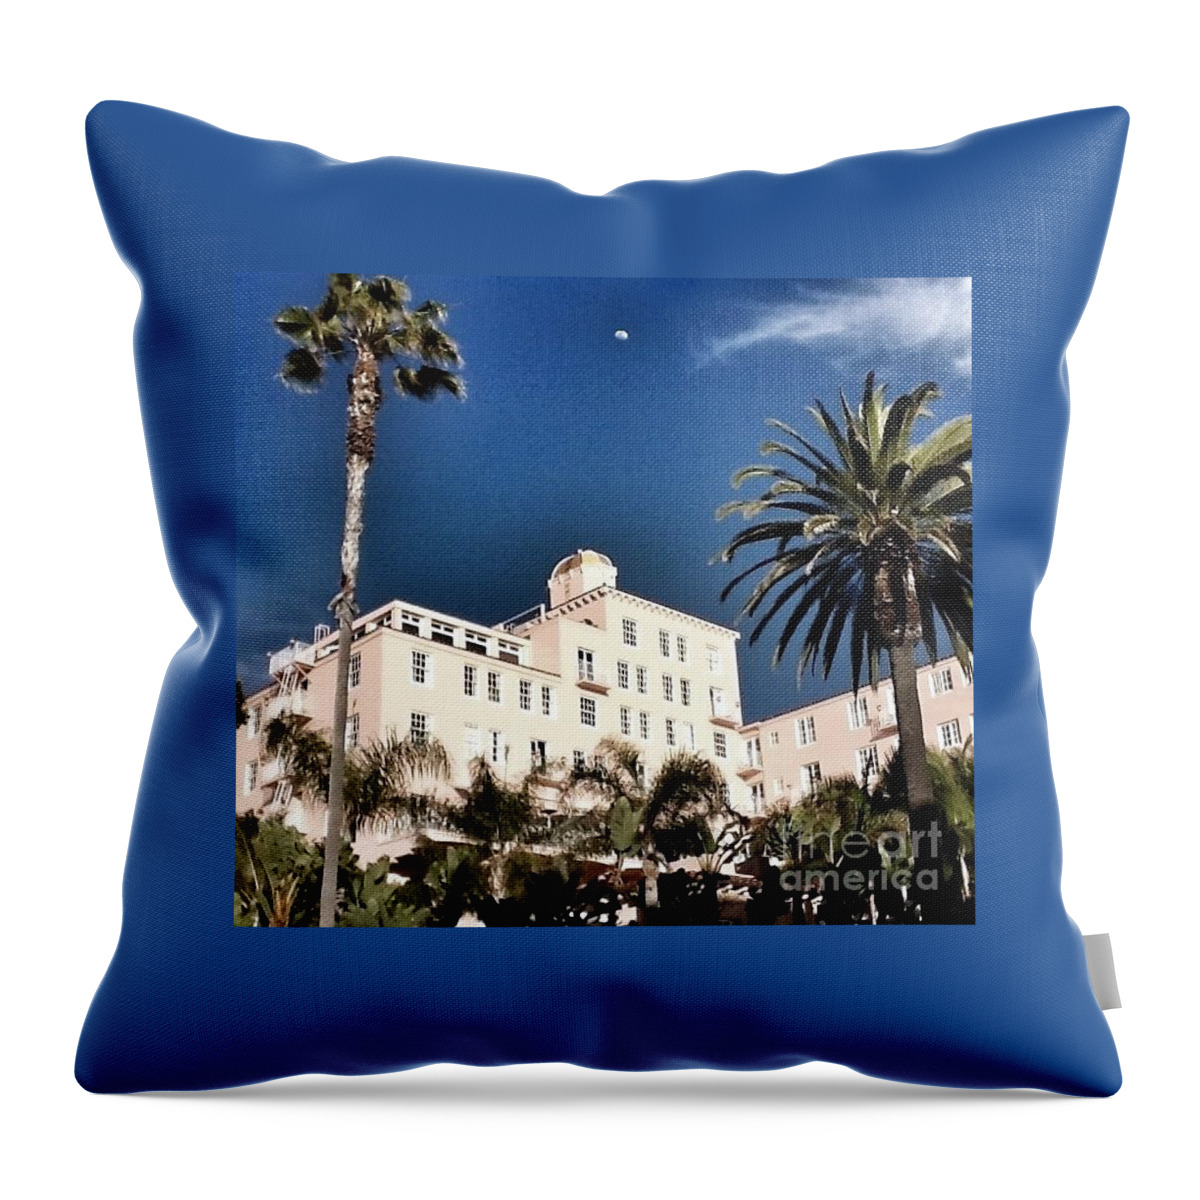 The Pink Lady Hotel Throw Pillow featuring the photograph Moon Over Pink Lady by Susan Garren